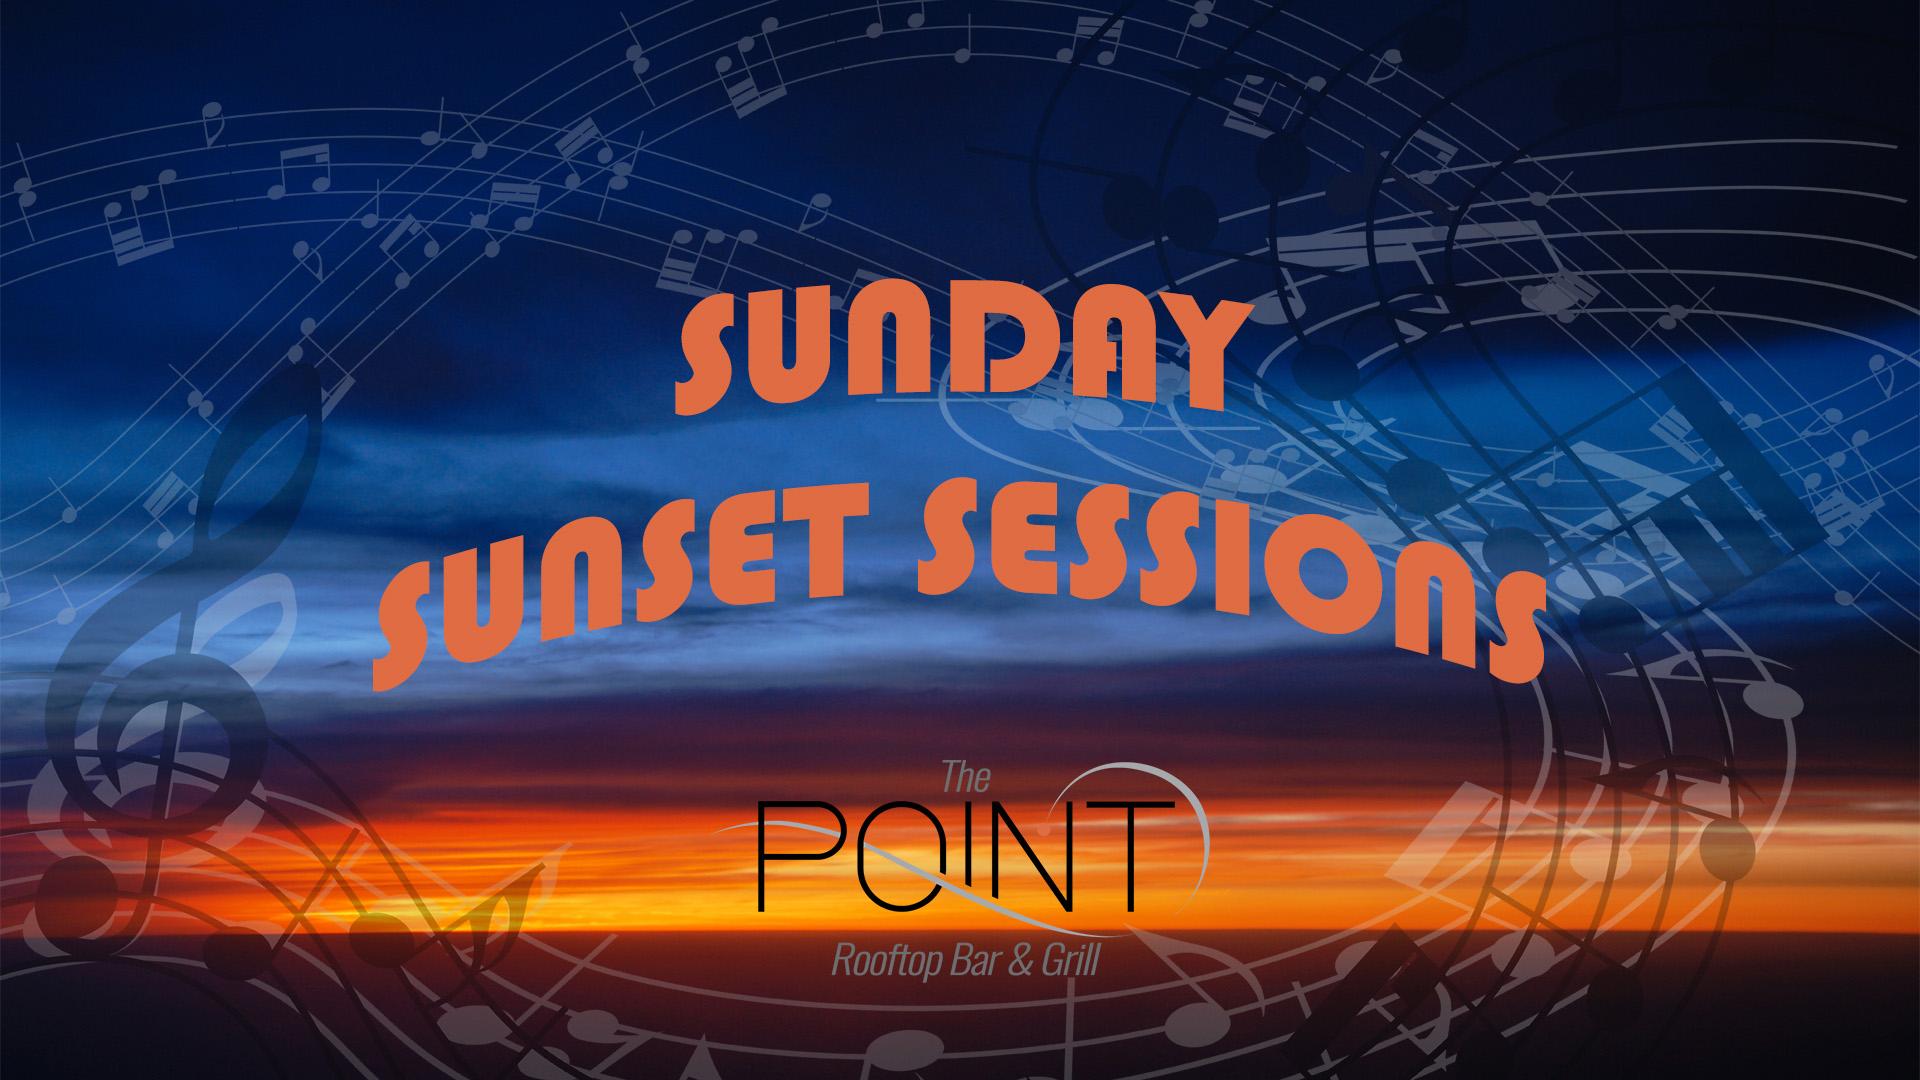 LIVE Sunday Sessions